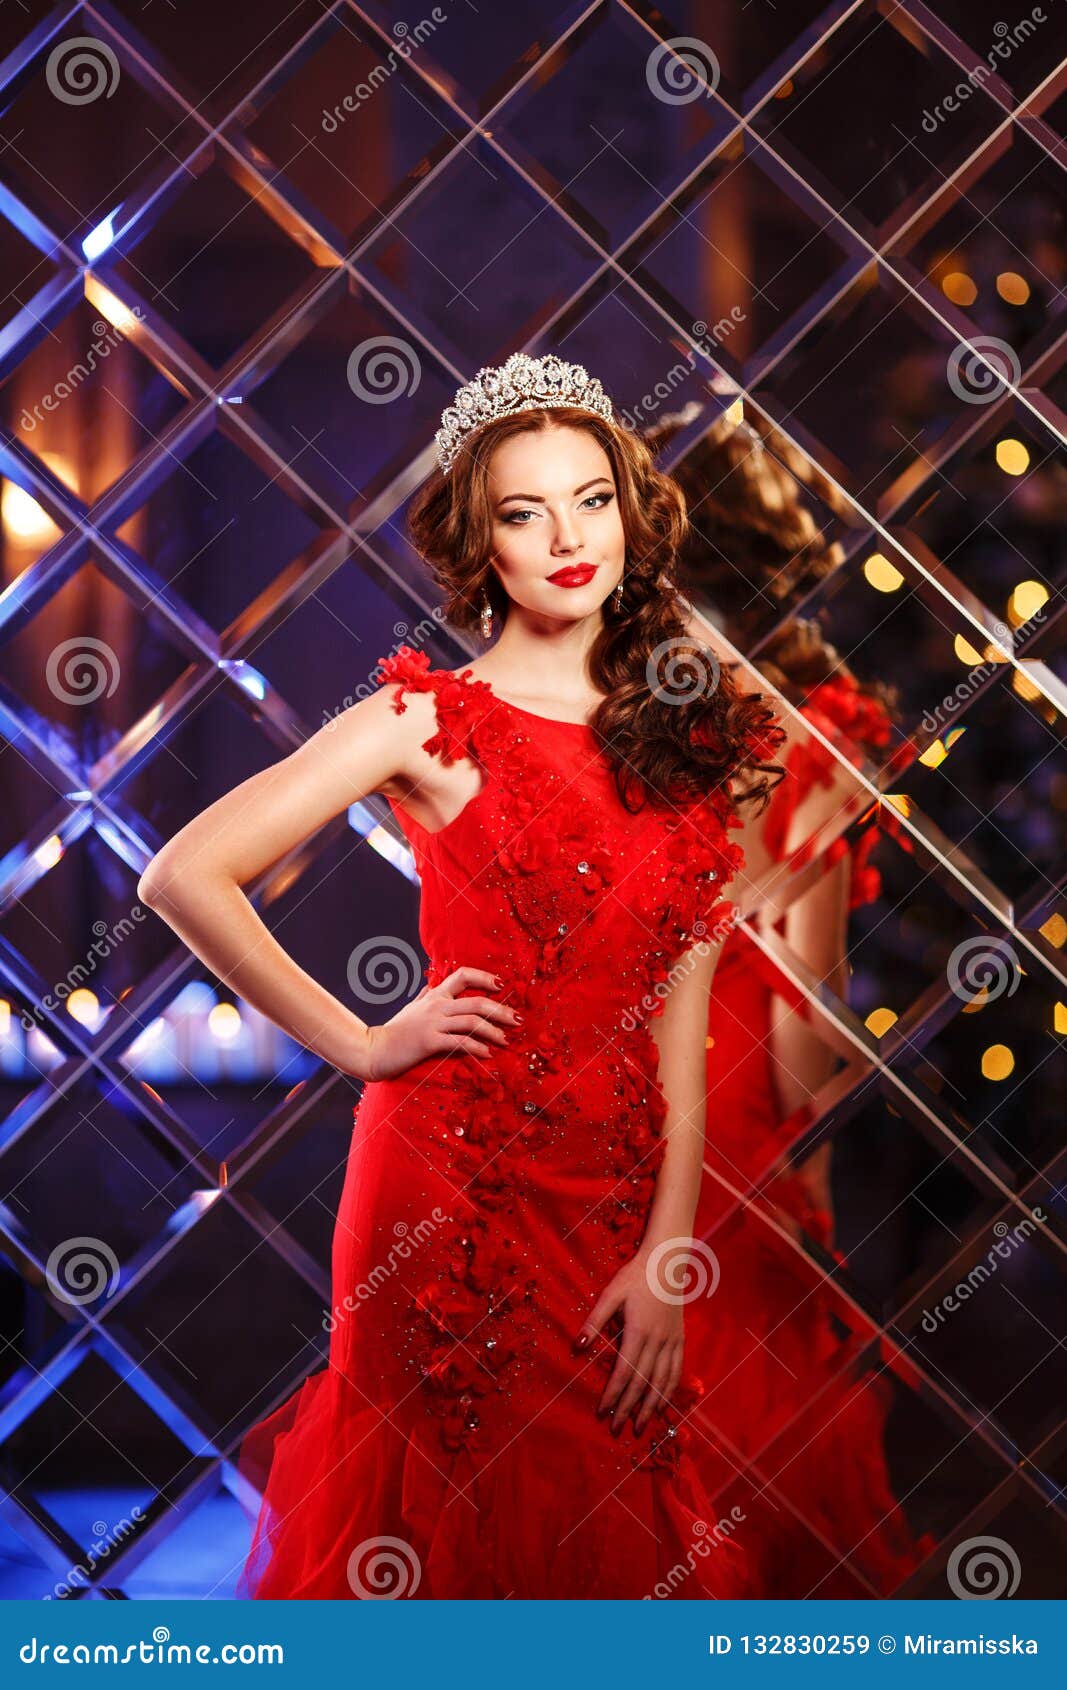 Woman Queen Princess in Crown and Lux Dress, Lights Party Background Luxury  Girl Long Shiny Healthy Volume Hair Waves Curls Stock Image - Image of hair,  black: 132830259